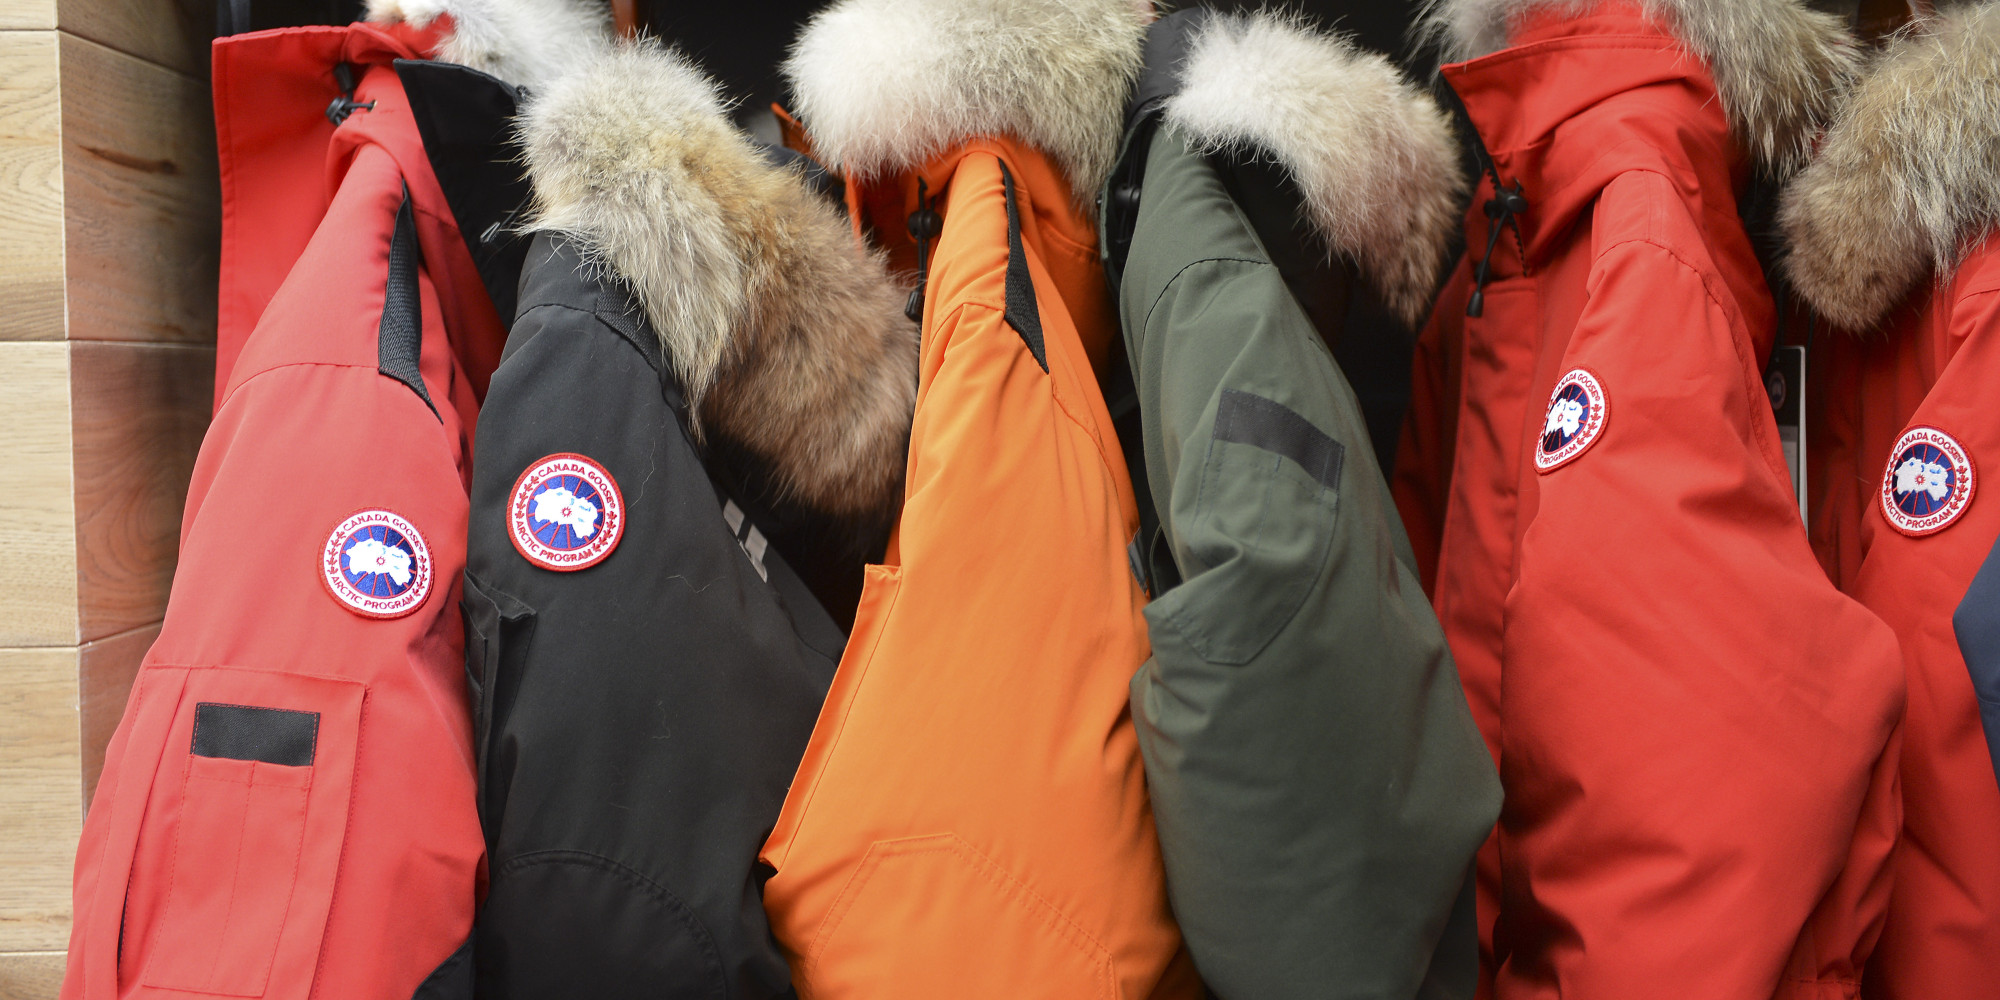 Canada Goose vest sale authentic - Canada Goose Jackets Keep Getting Stolen At Boston University